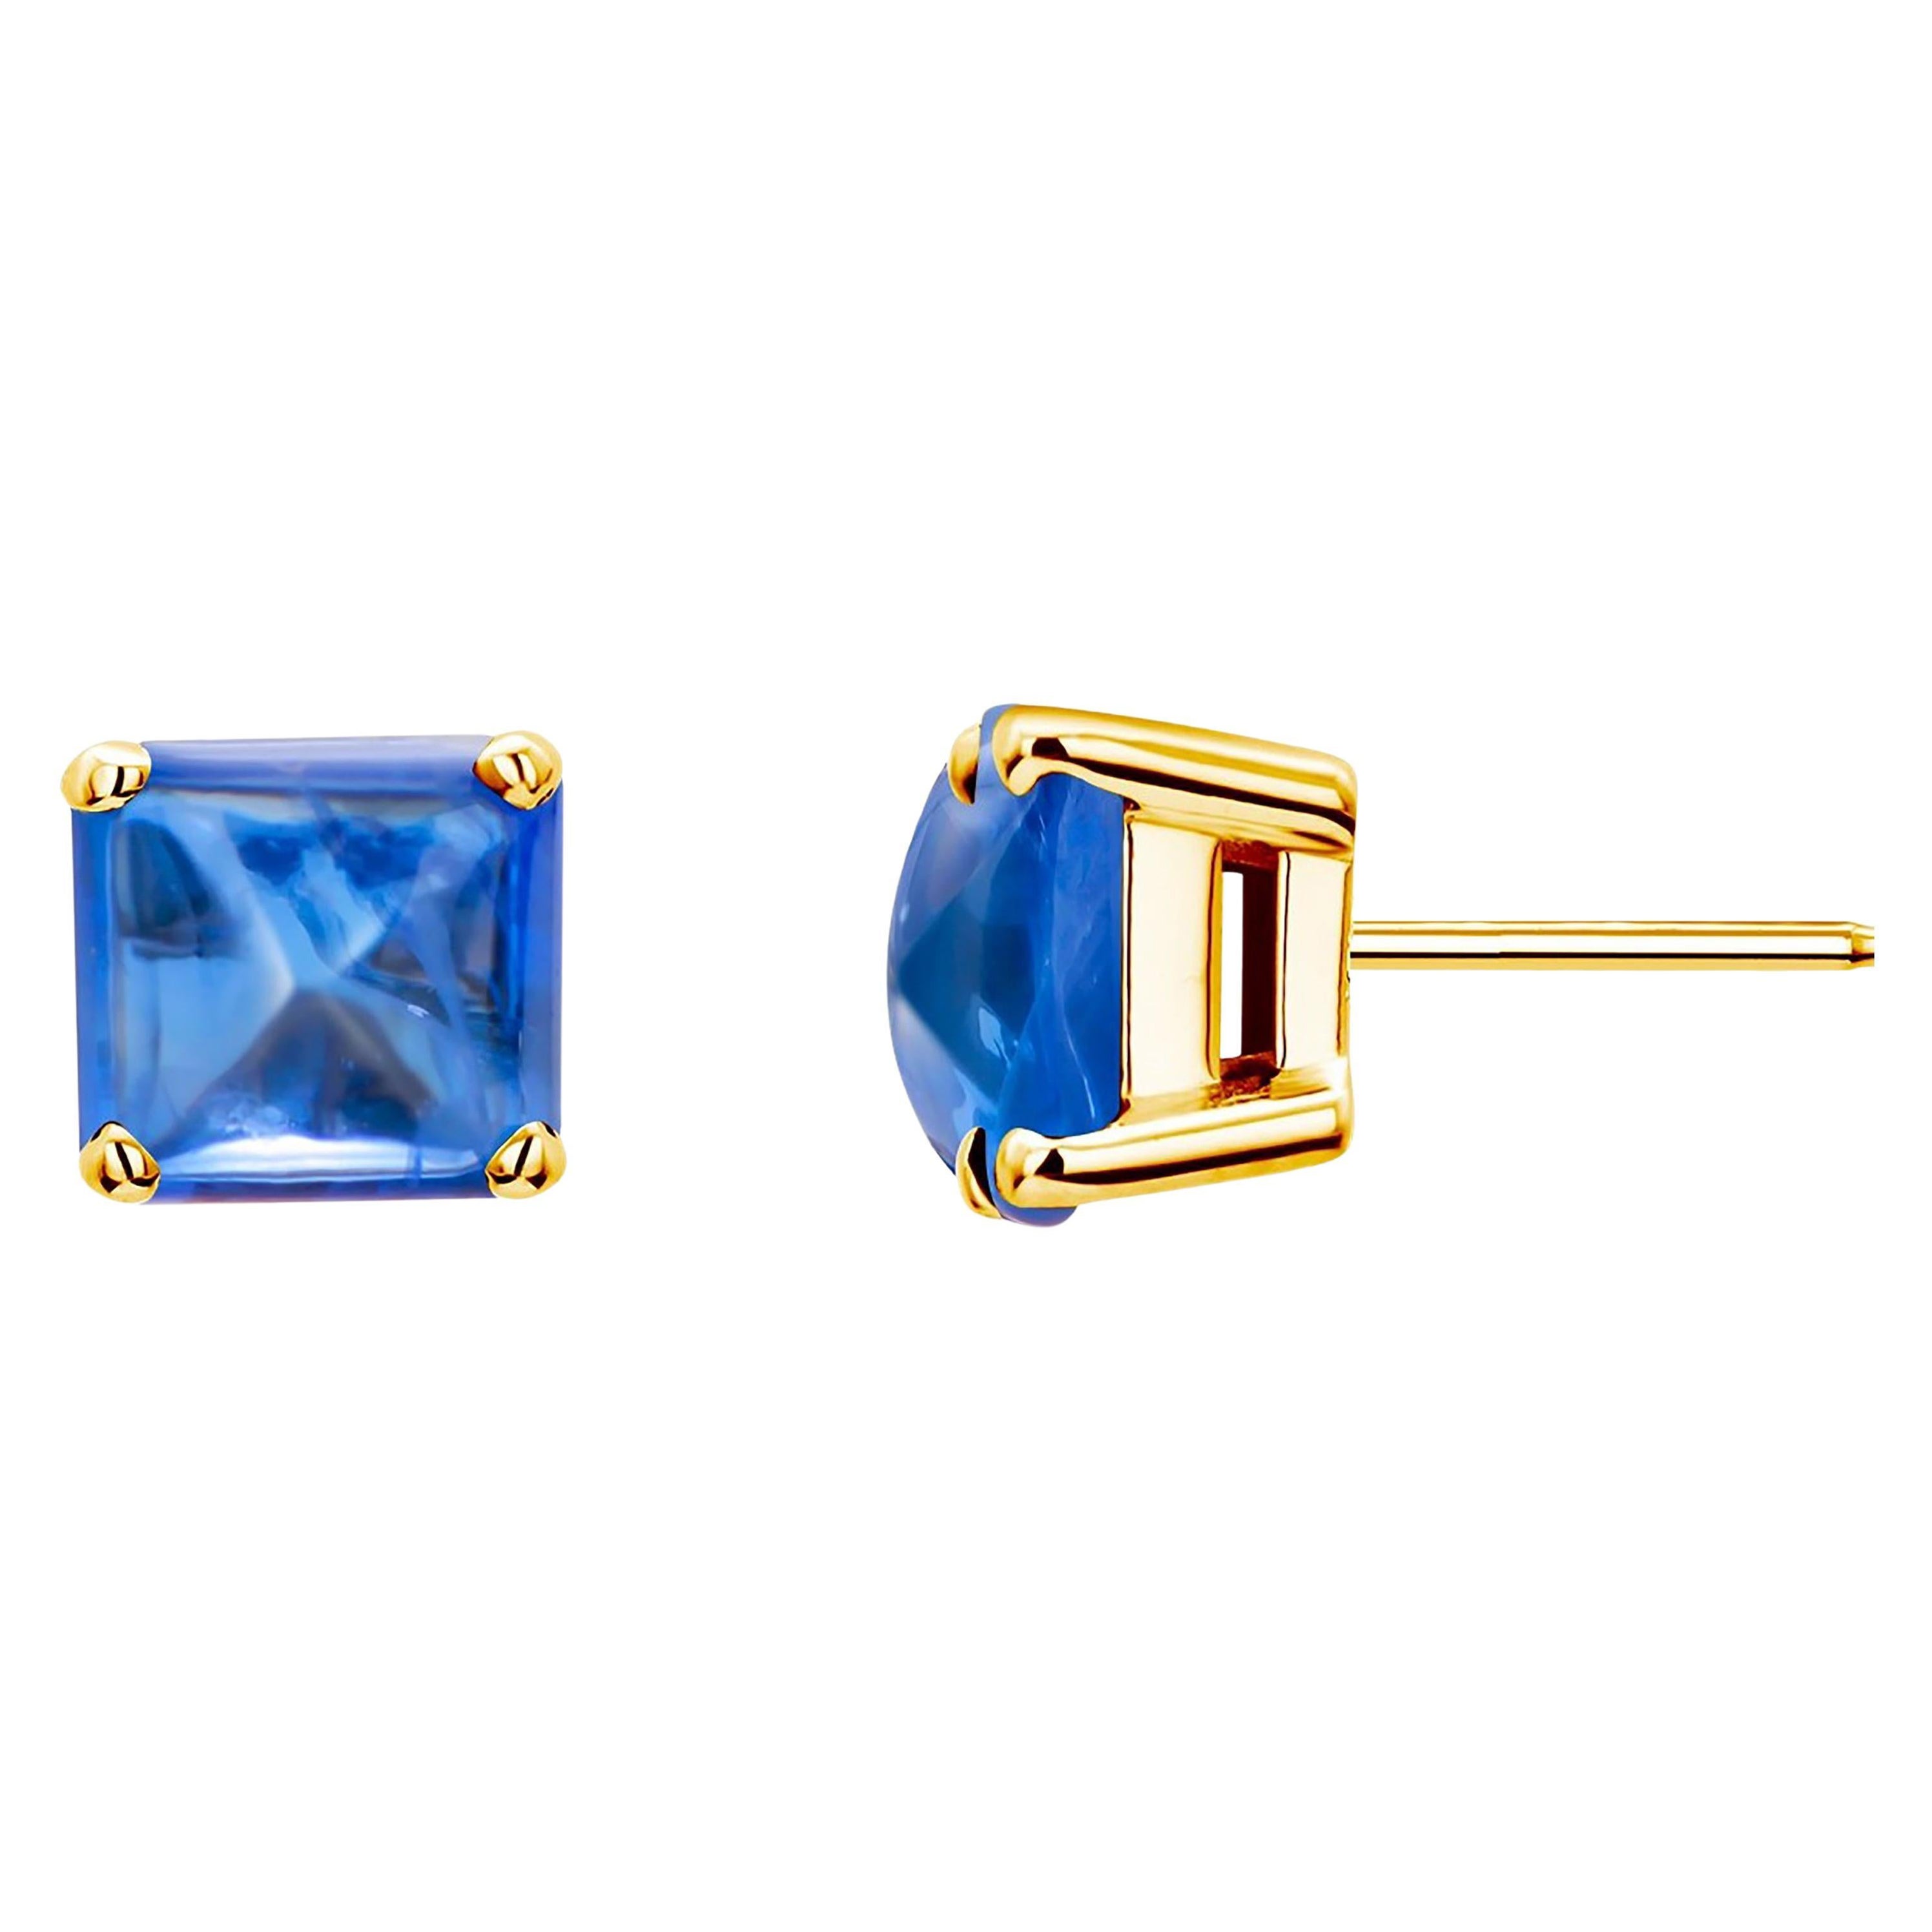 Square Shaped Sugarloaf Ceylon Cabochon Sapphire 1.20 Carat Gold Stud Earrings